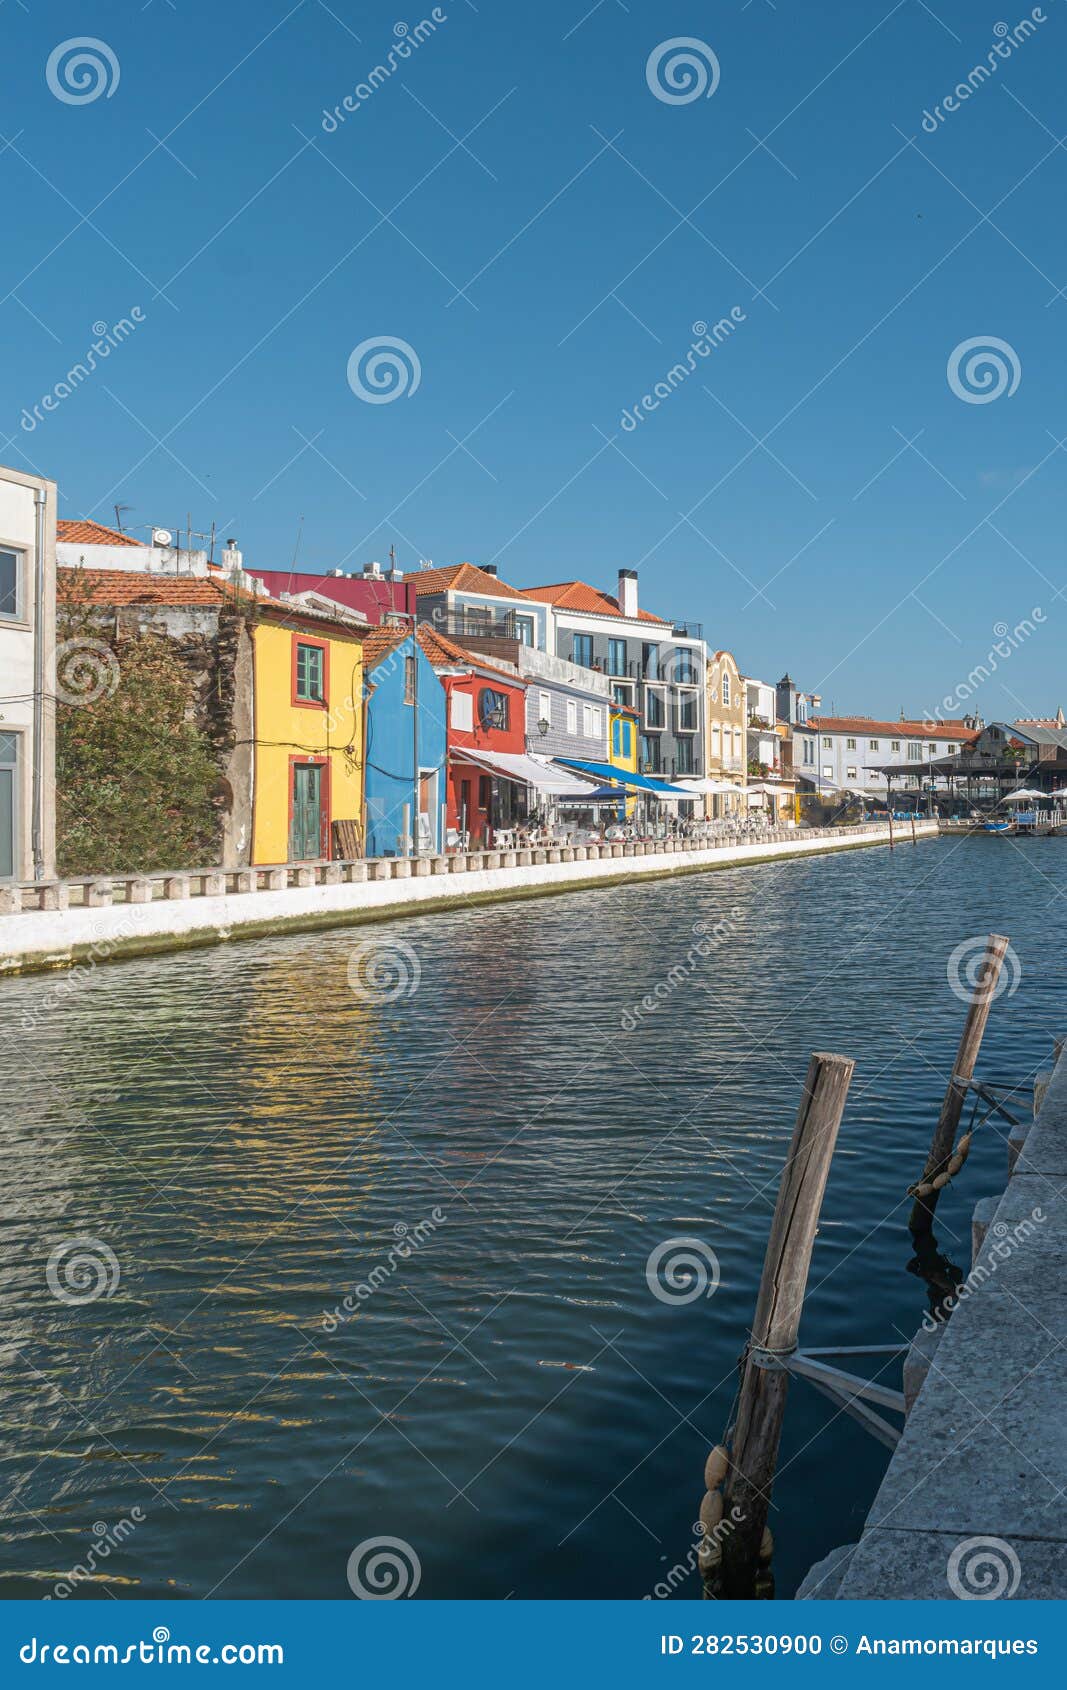 art nouveau buildings and boats in aveiro, centro region of portugal, europe